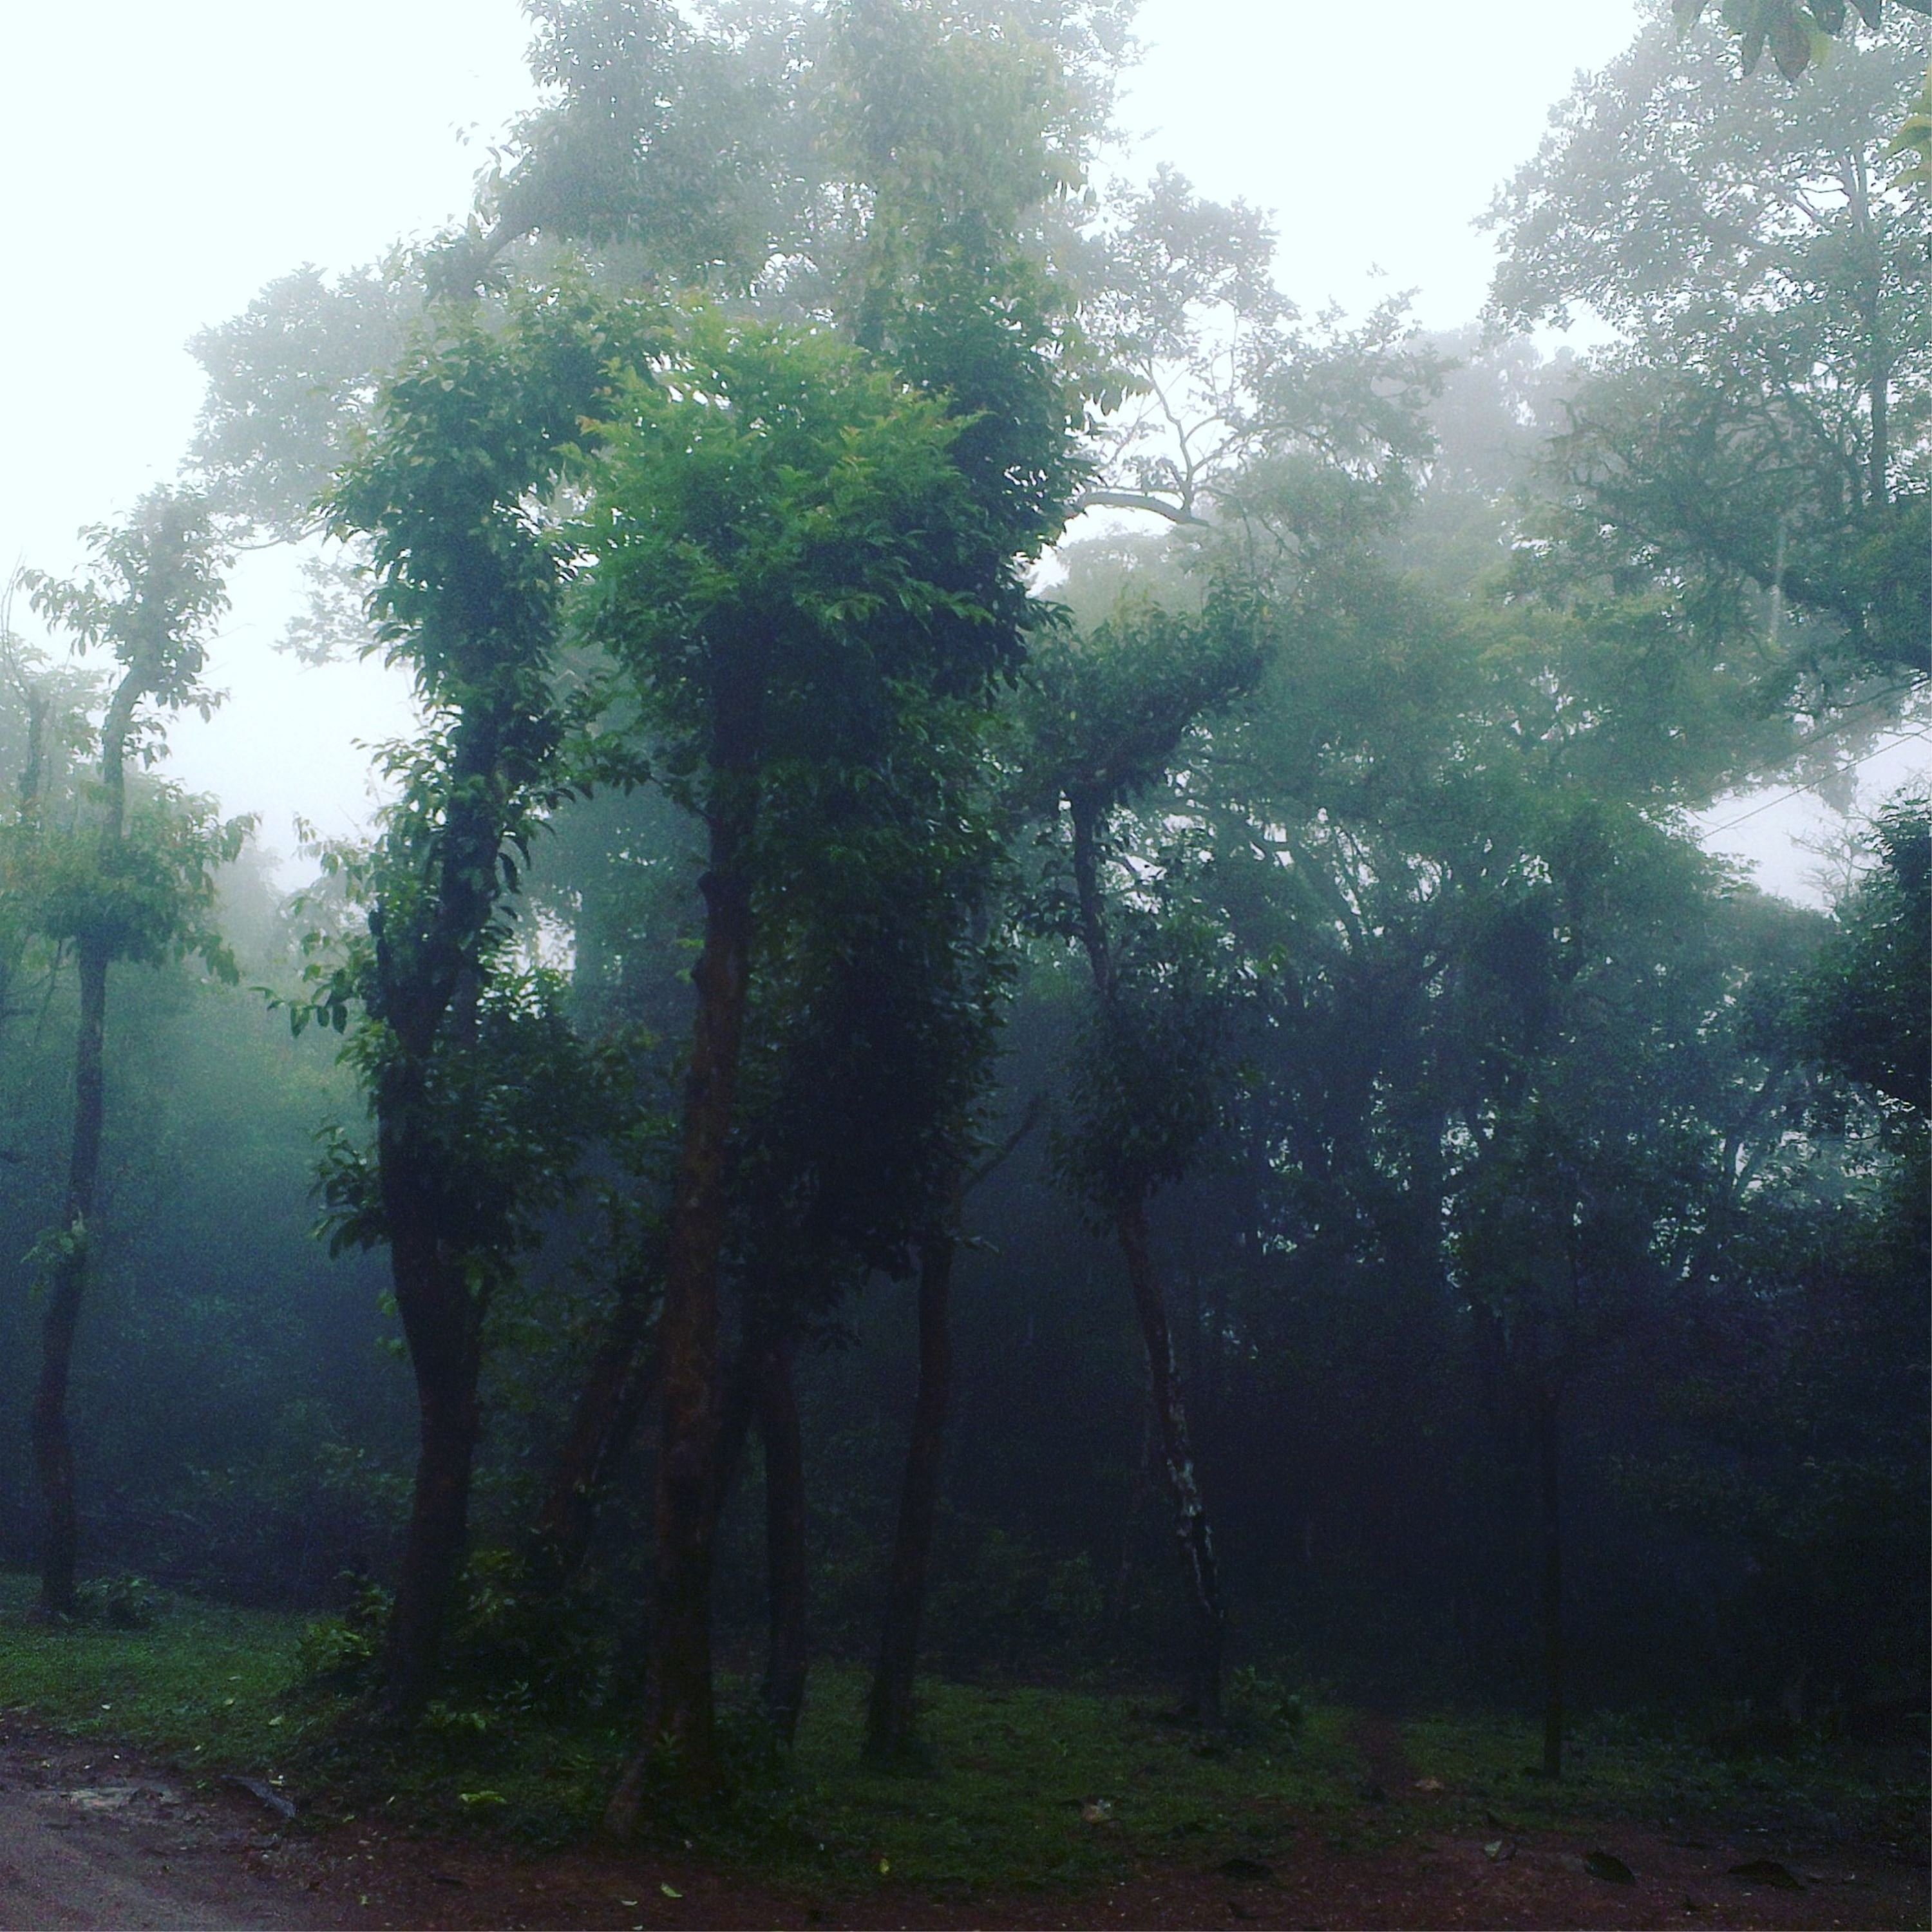 Rainforest under the spell of the South Asian Monsoons